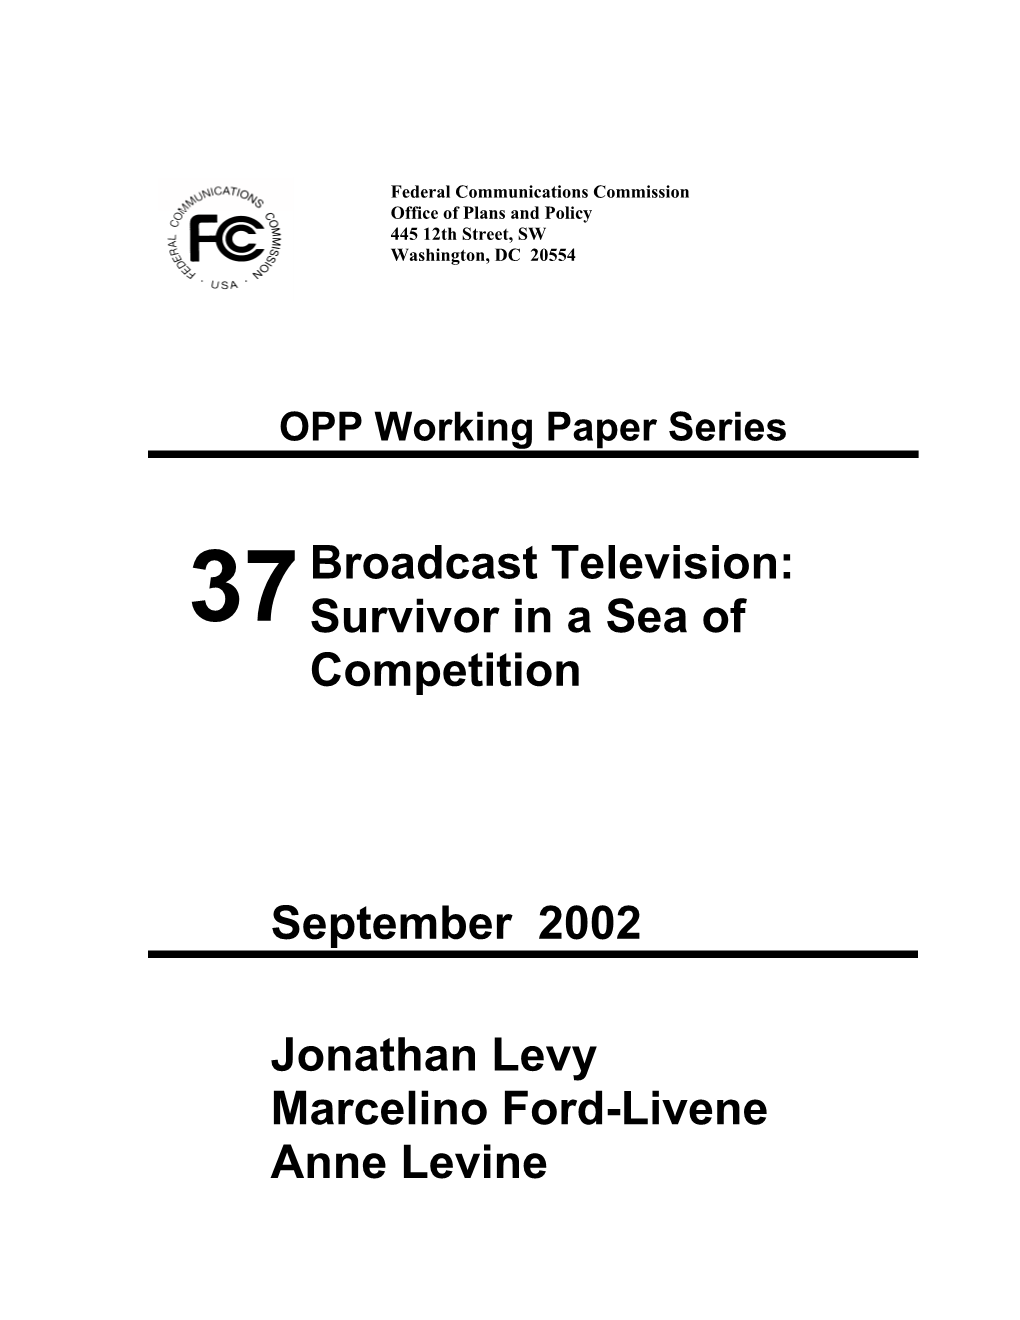 Broadcast Television: 37 Survivor in a Sea of Competition